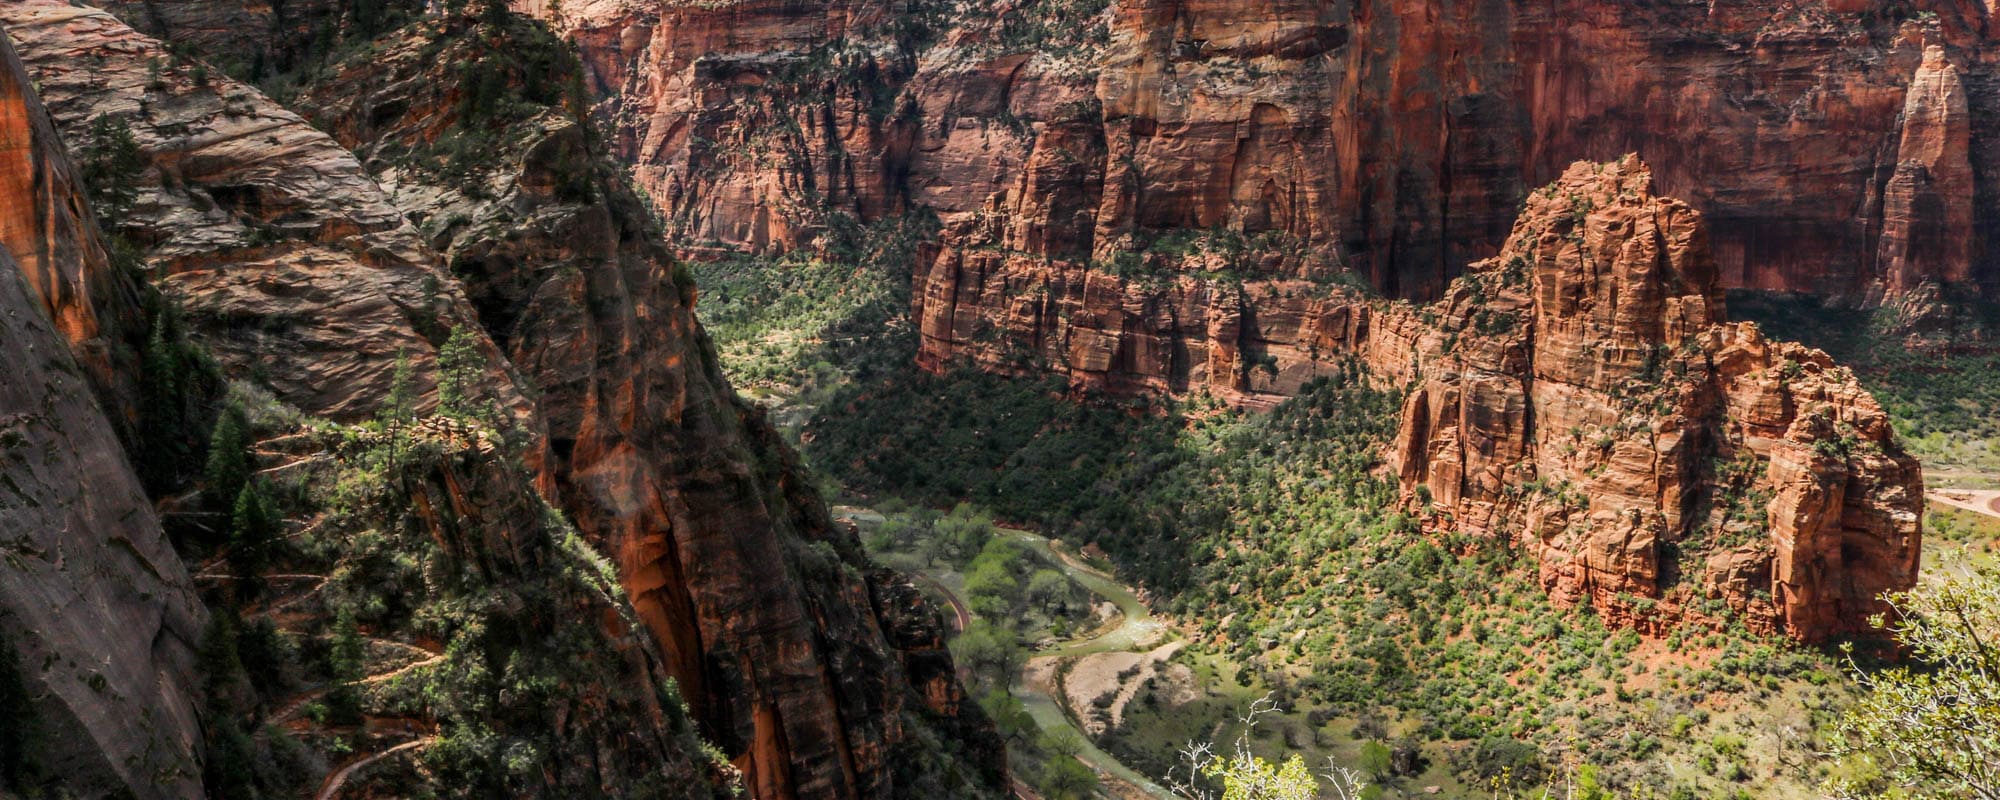 Zion National Park - Banner Zion Canyon